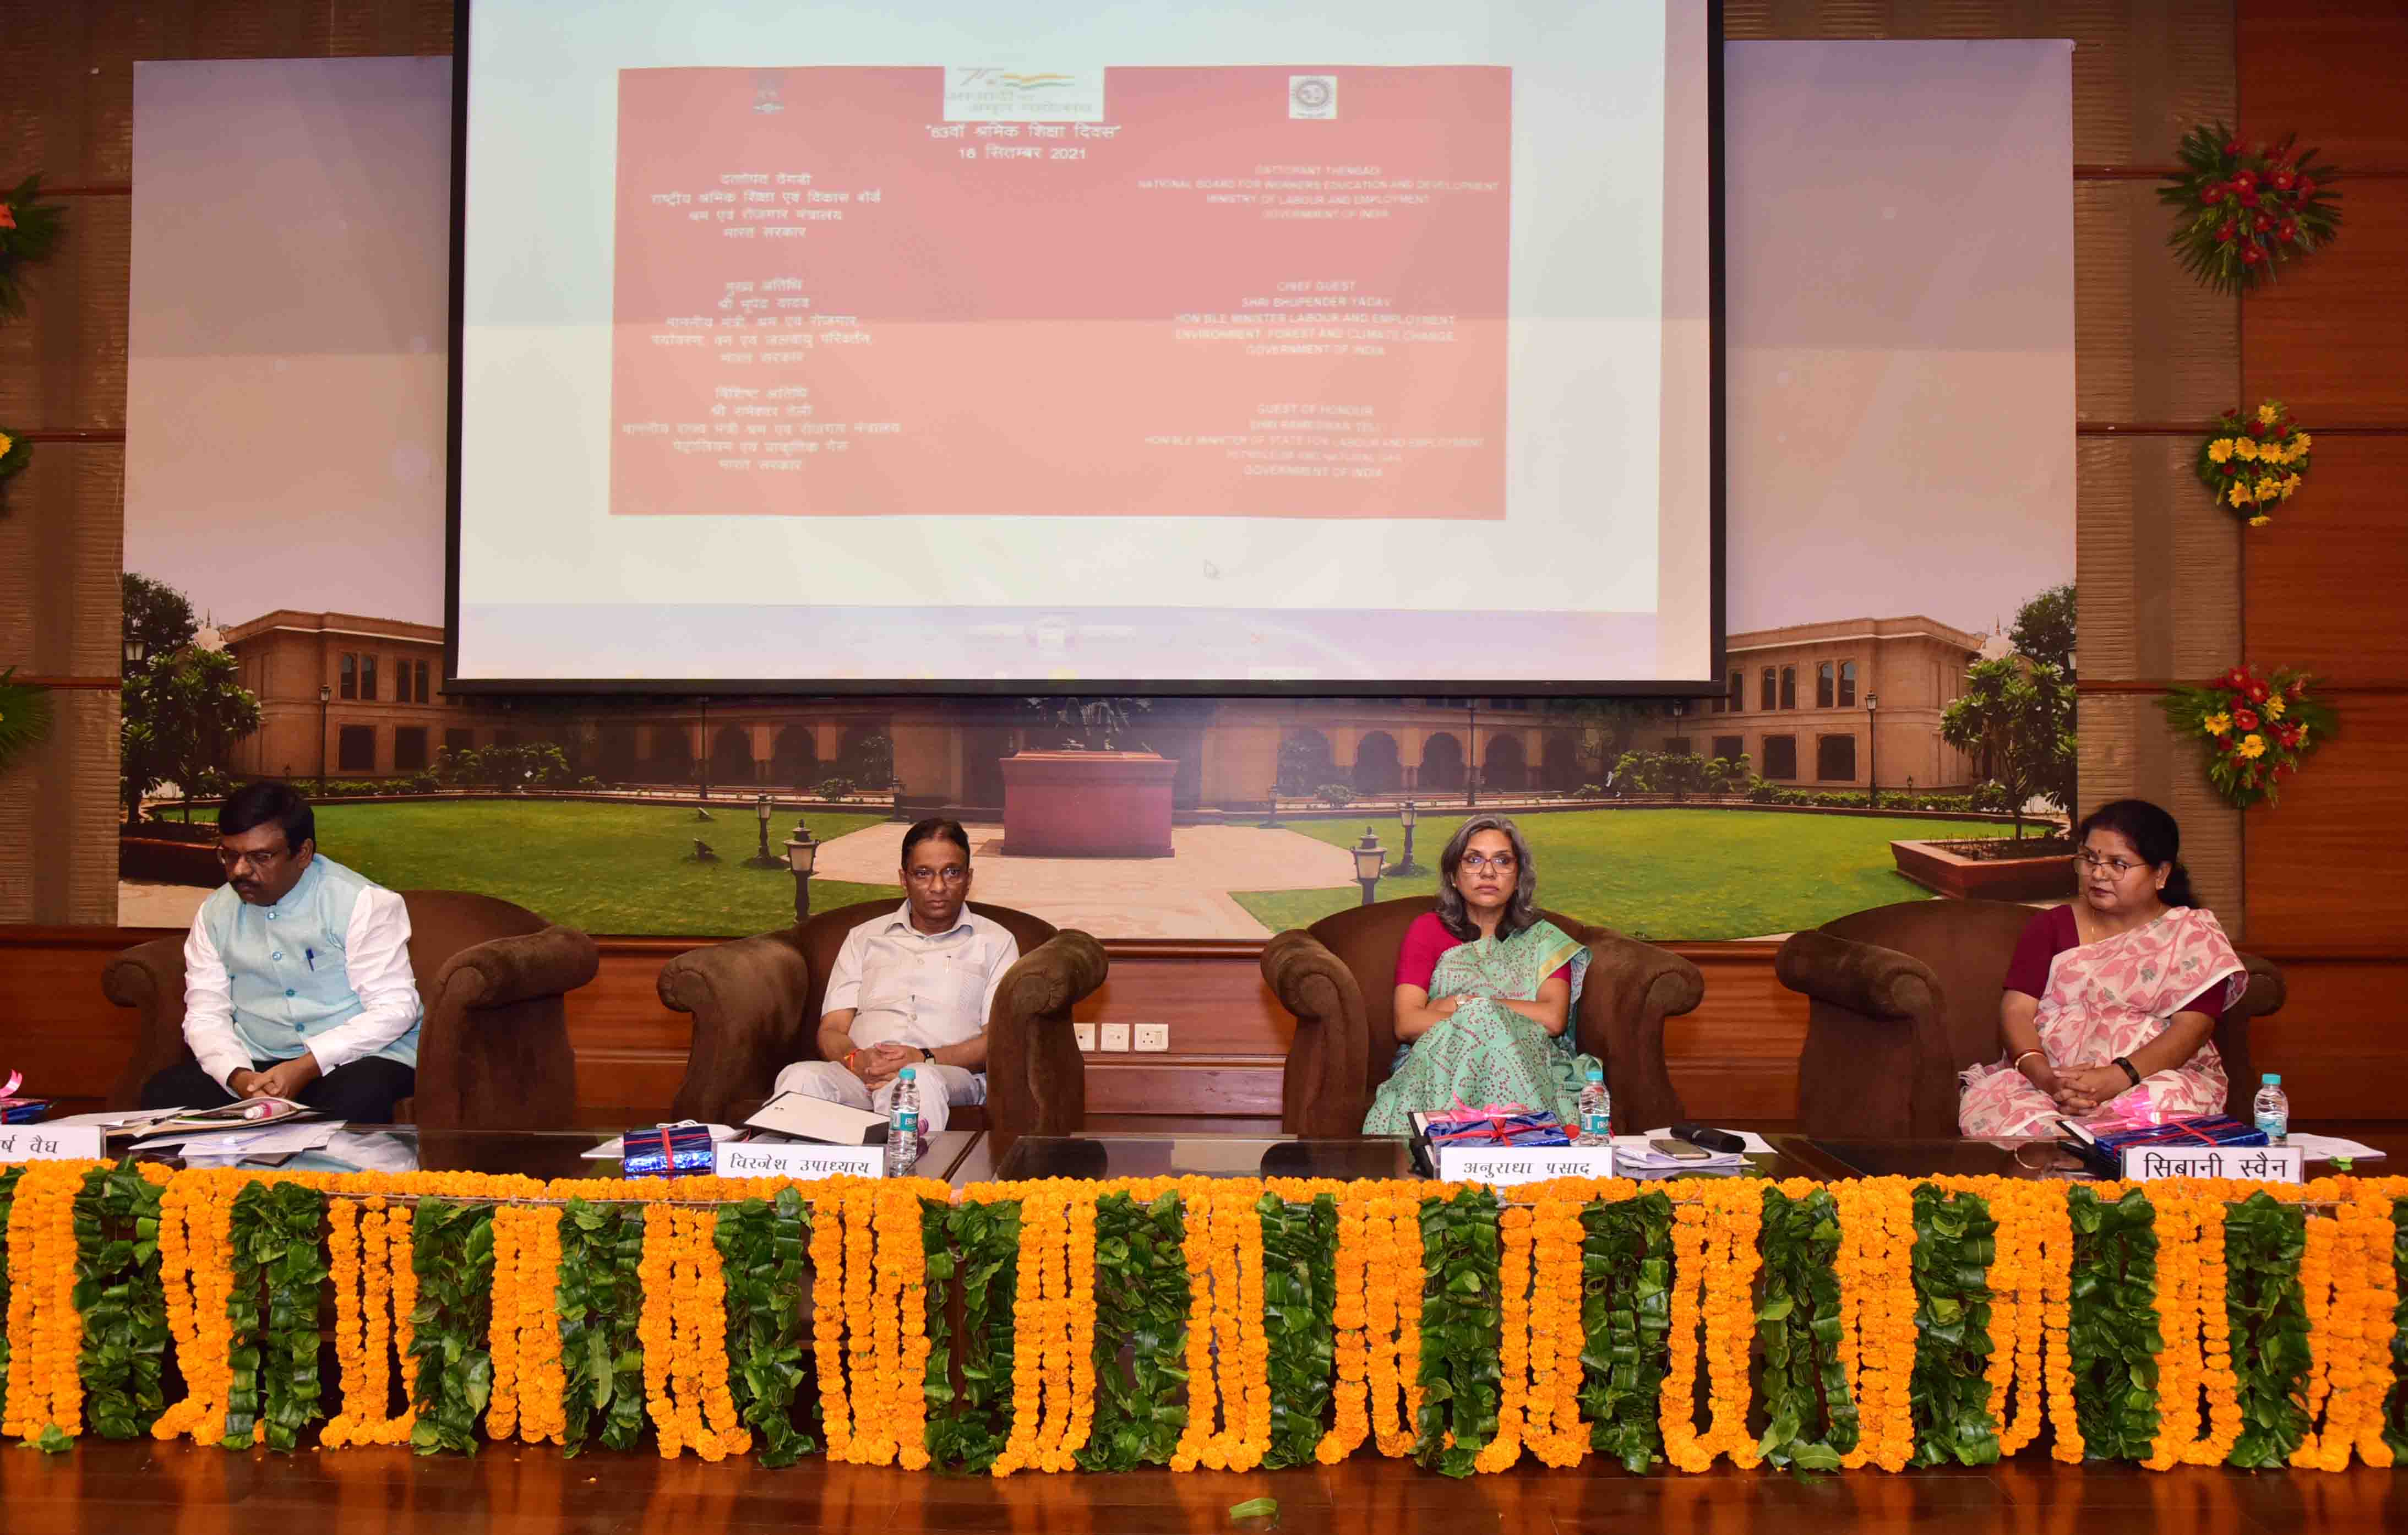 
<p>Glimpses of Celebration of Workers Education Day on 16th September, 2021 at New Delhi</p>
 